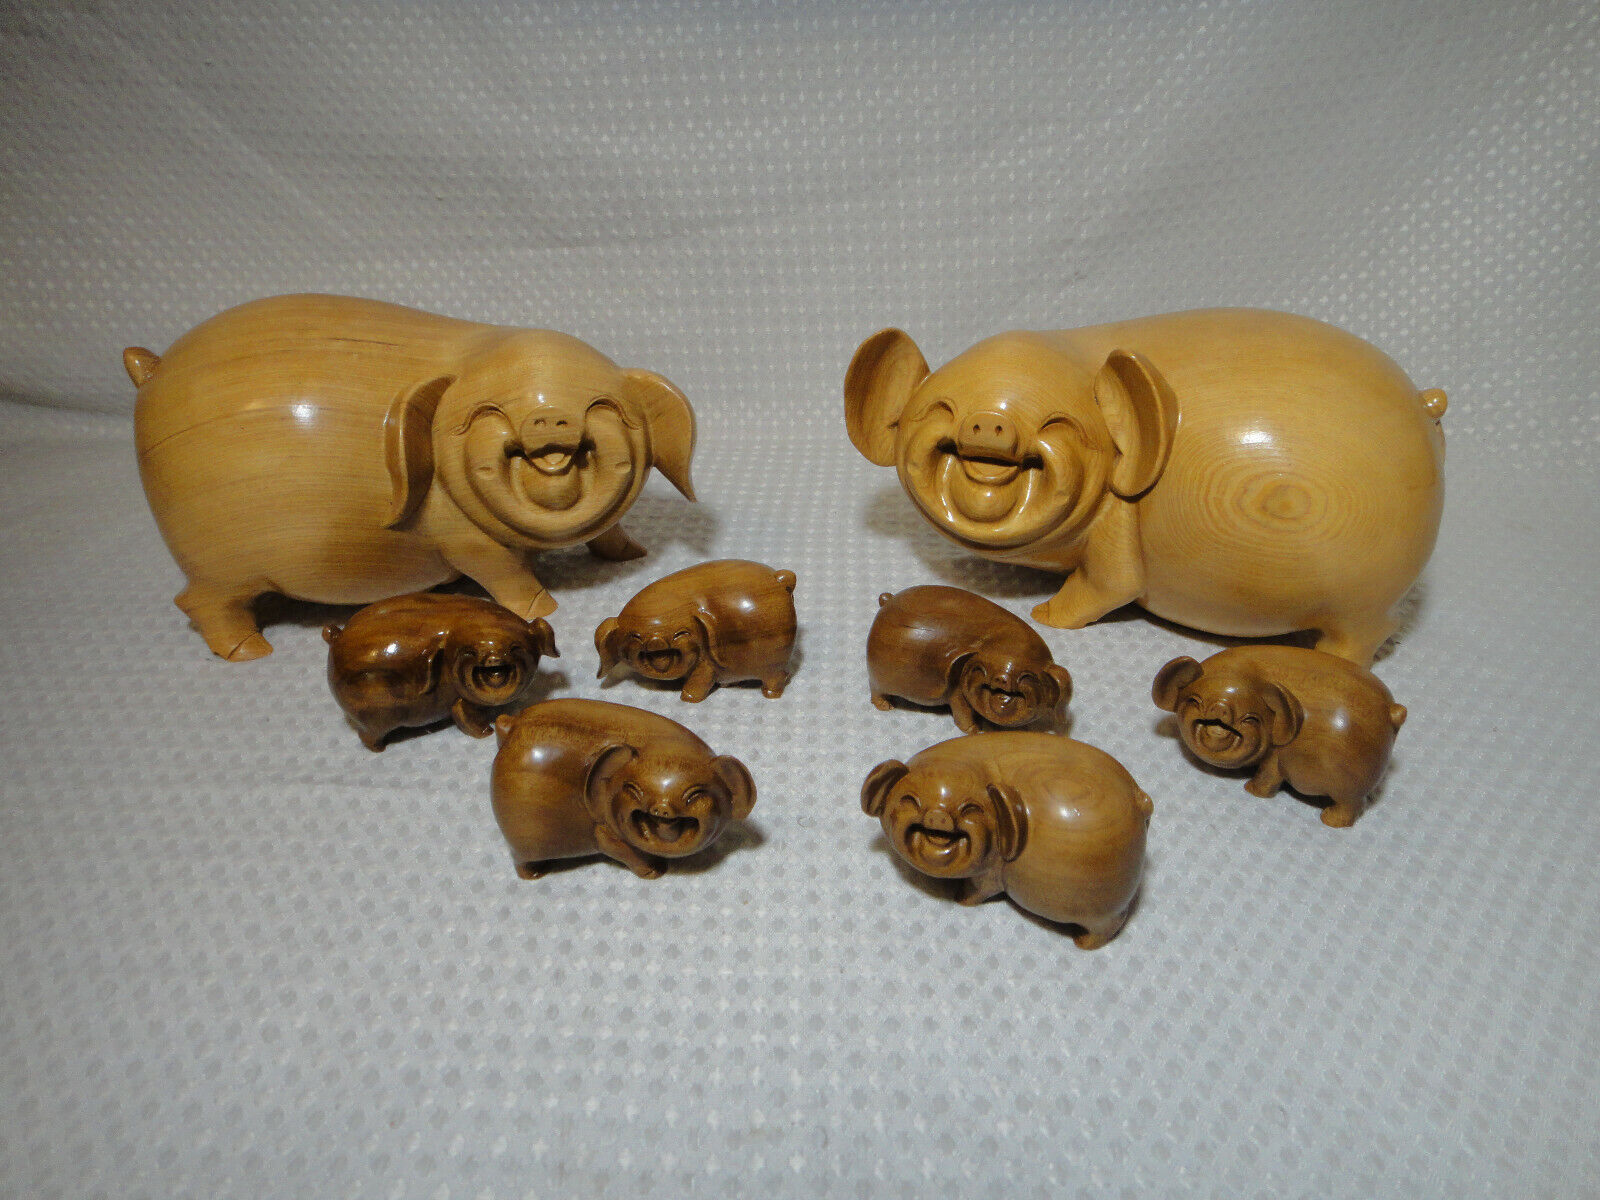 Carved Solid Wood Happy Smiling Pig Family Detailed Mom Dad & 6 Babies Set of 8